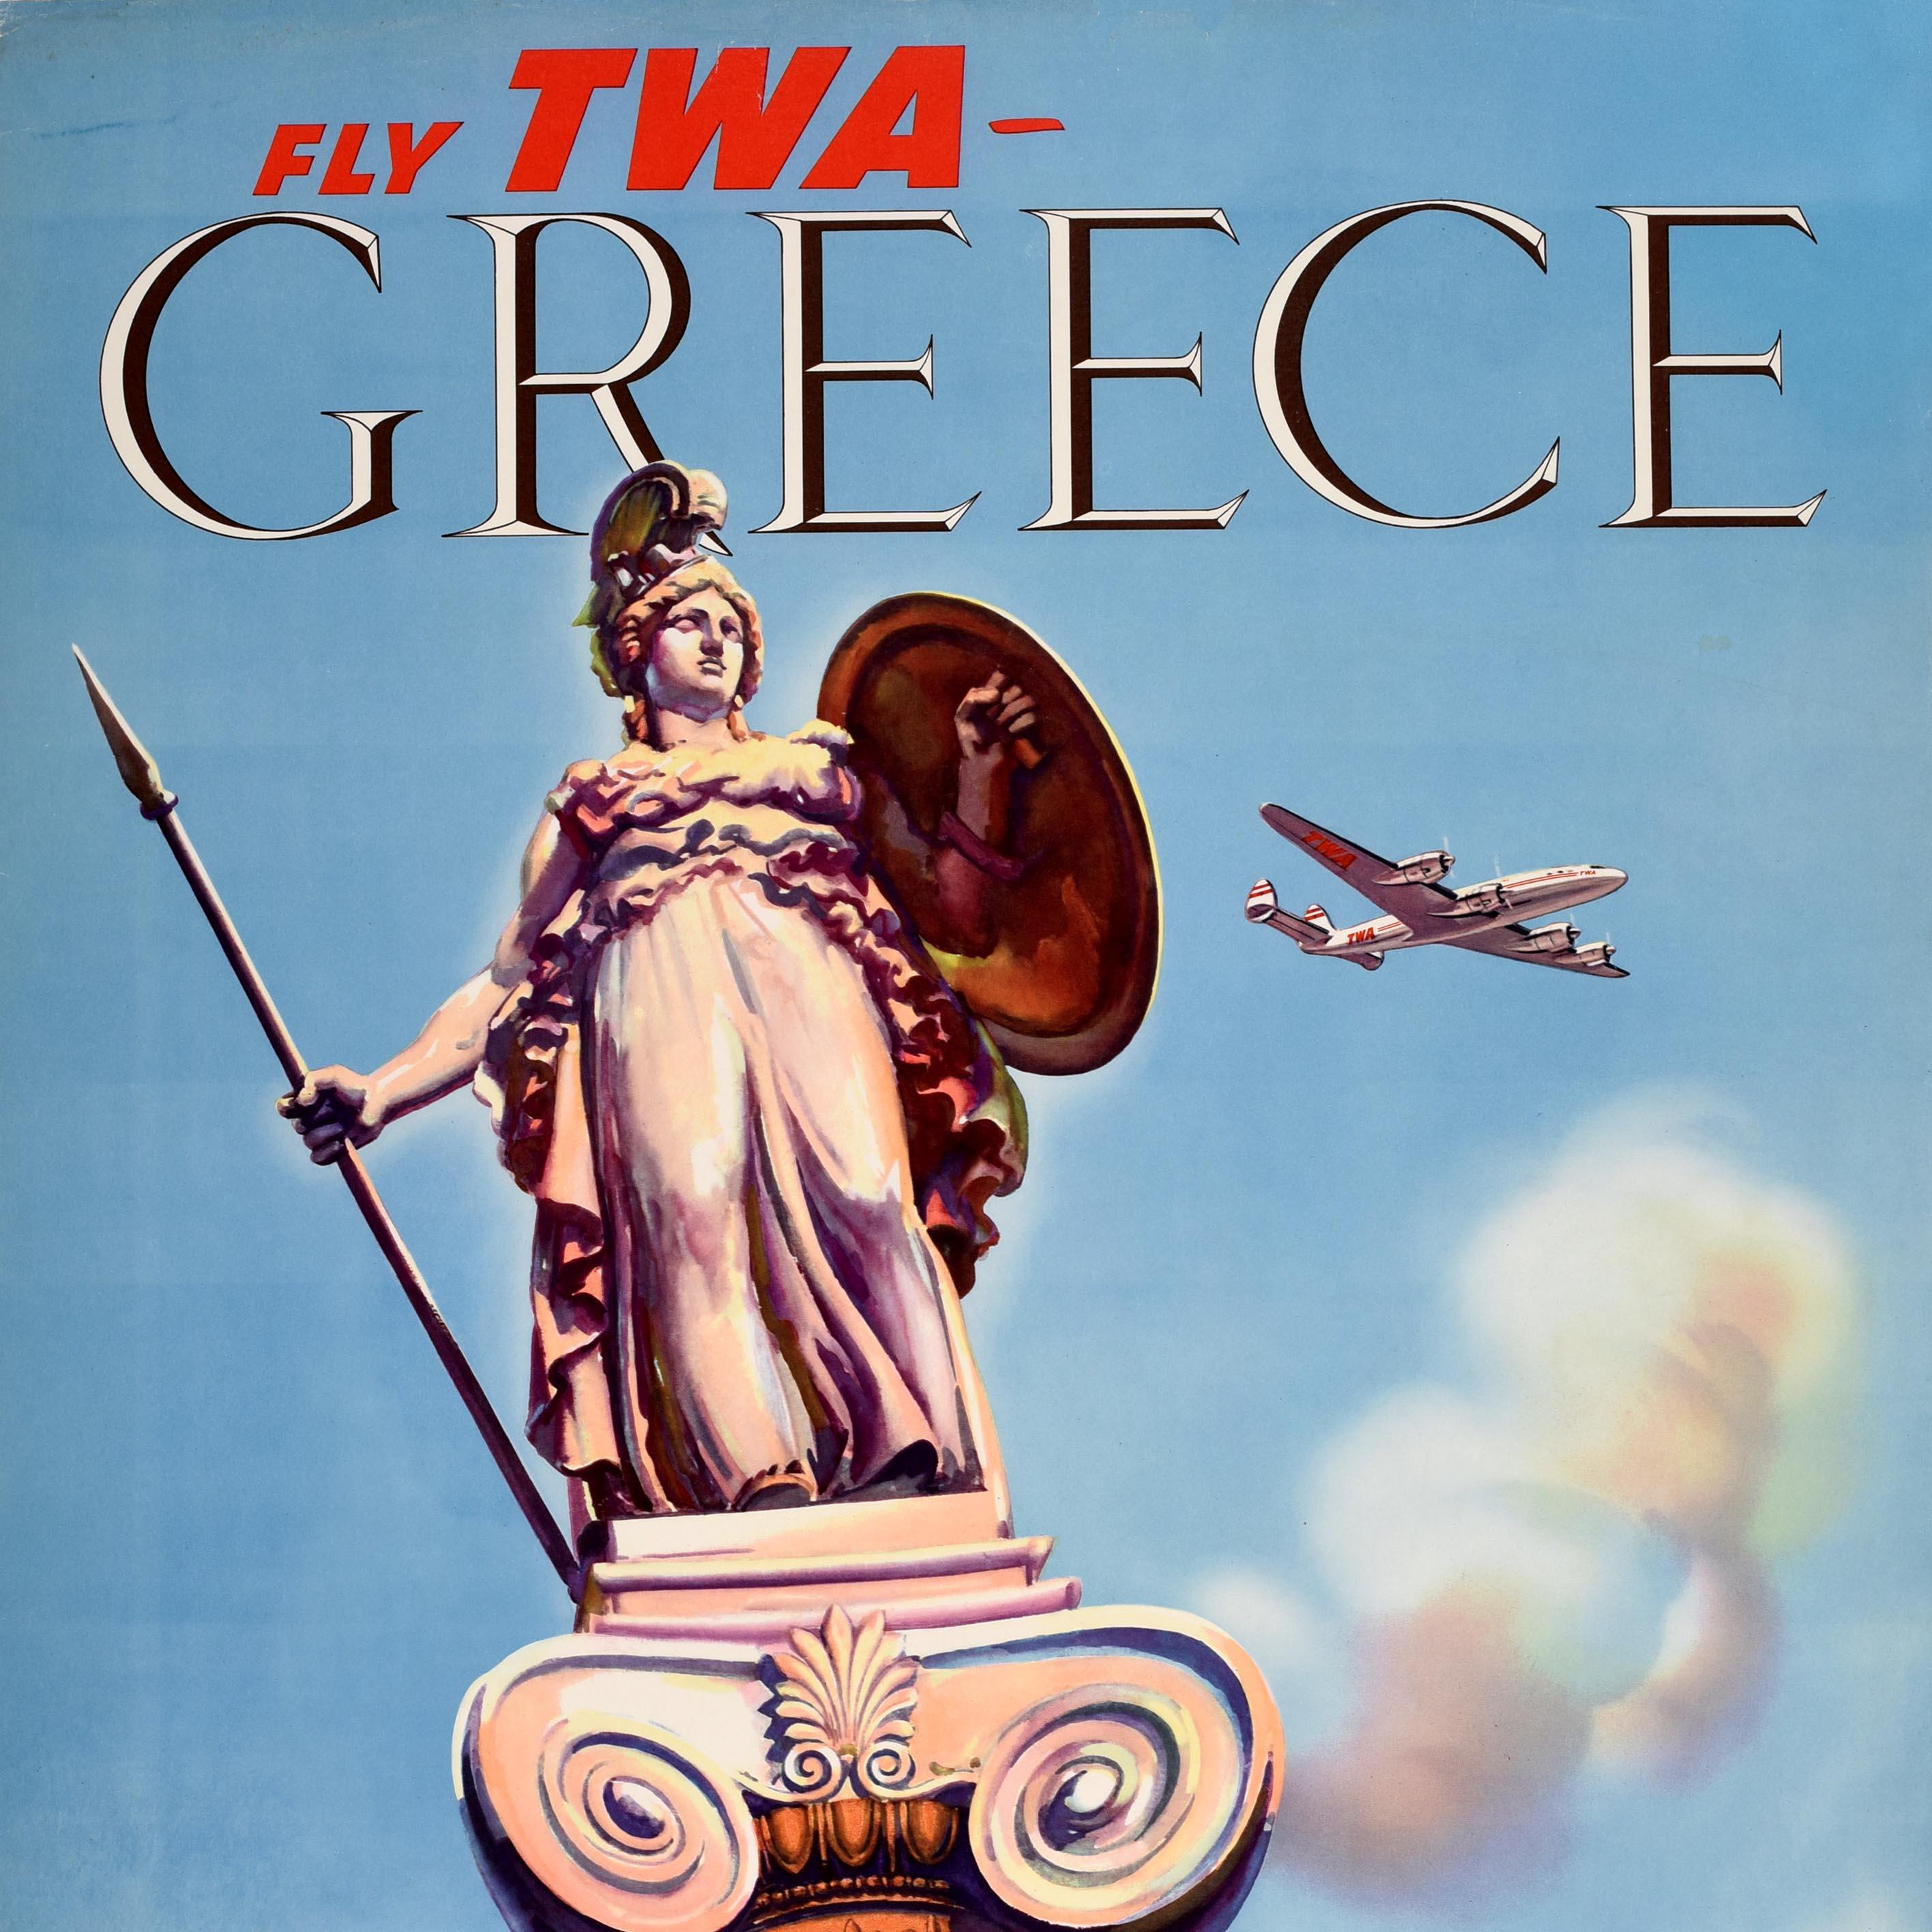 American Original Vintage Travel Poster Greece Fly TWA Airlines Lockheed Constellation For Sale